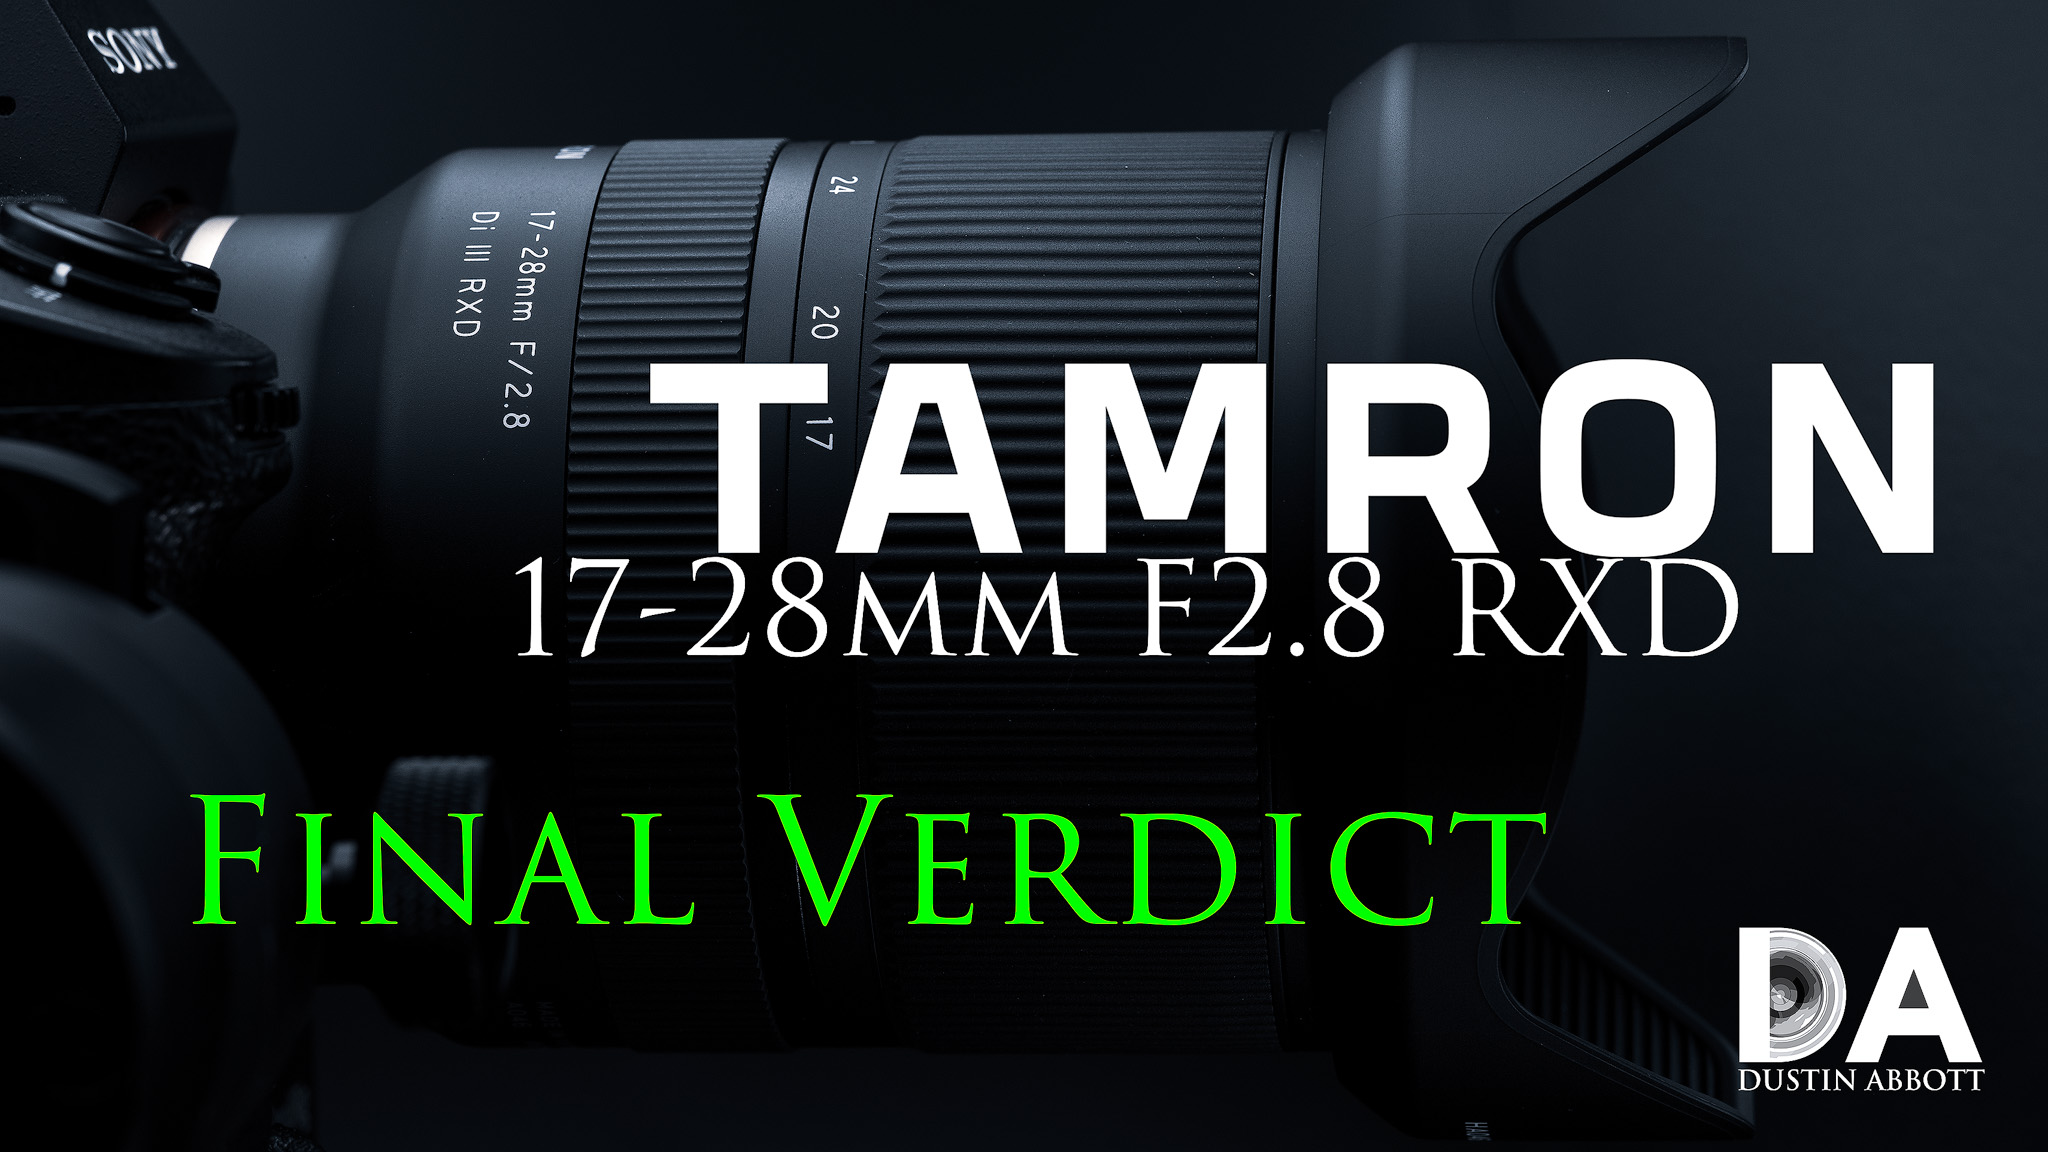 Tamron 17-28mm F2.8 RXD (A046) Review | 4K